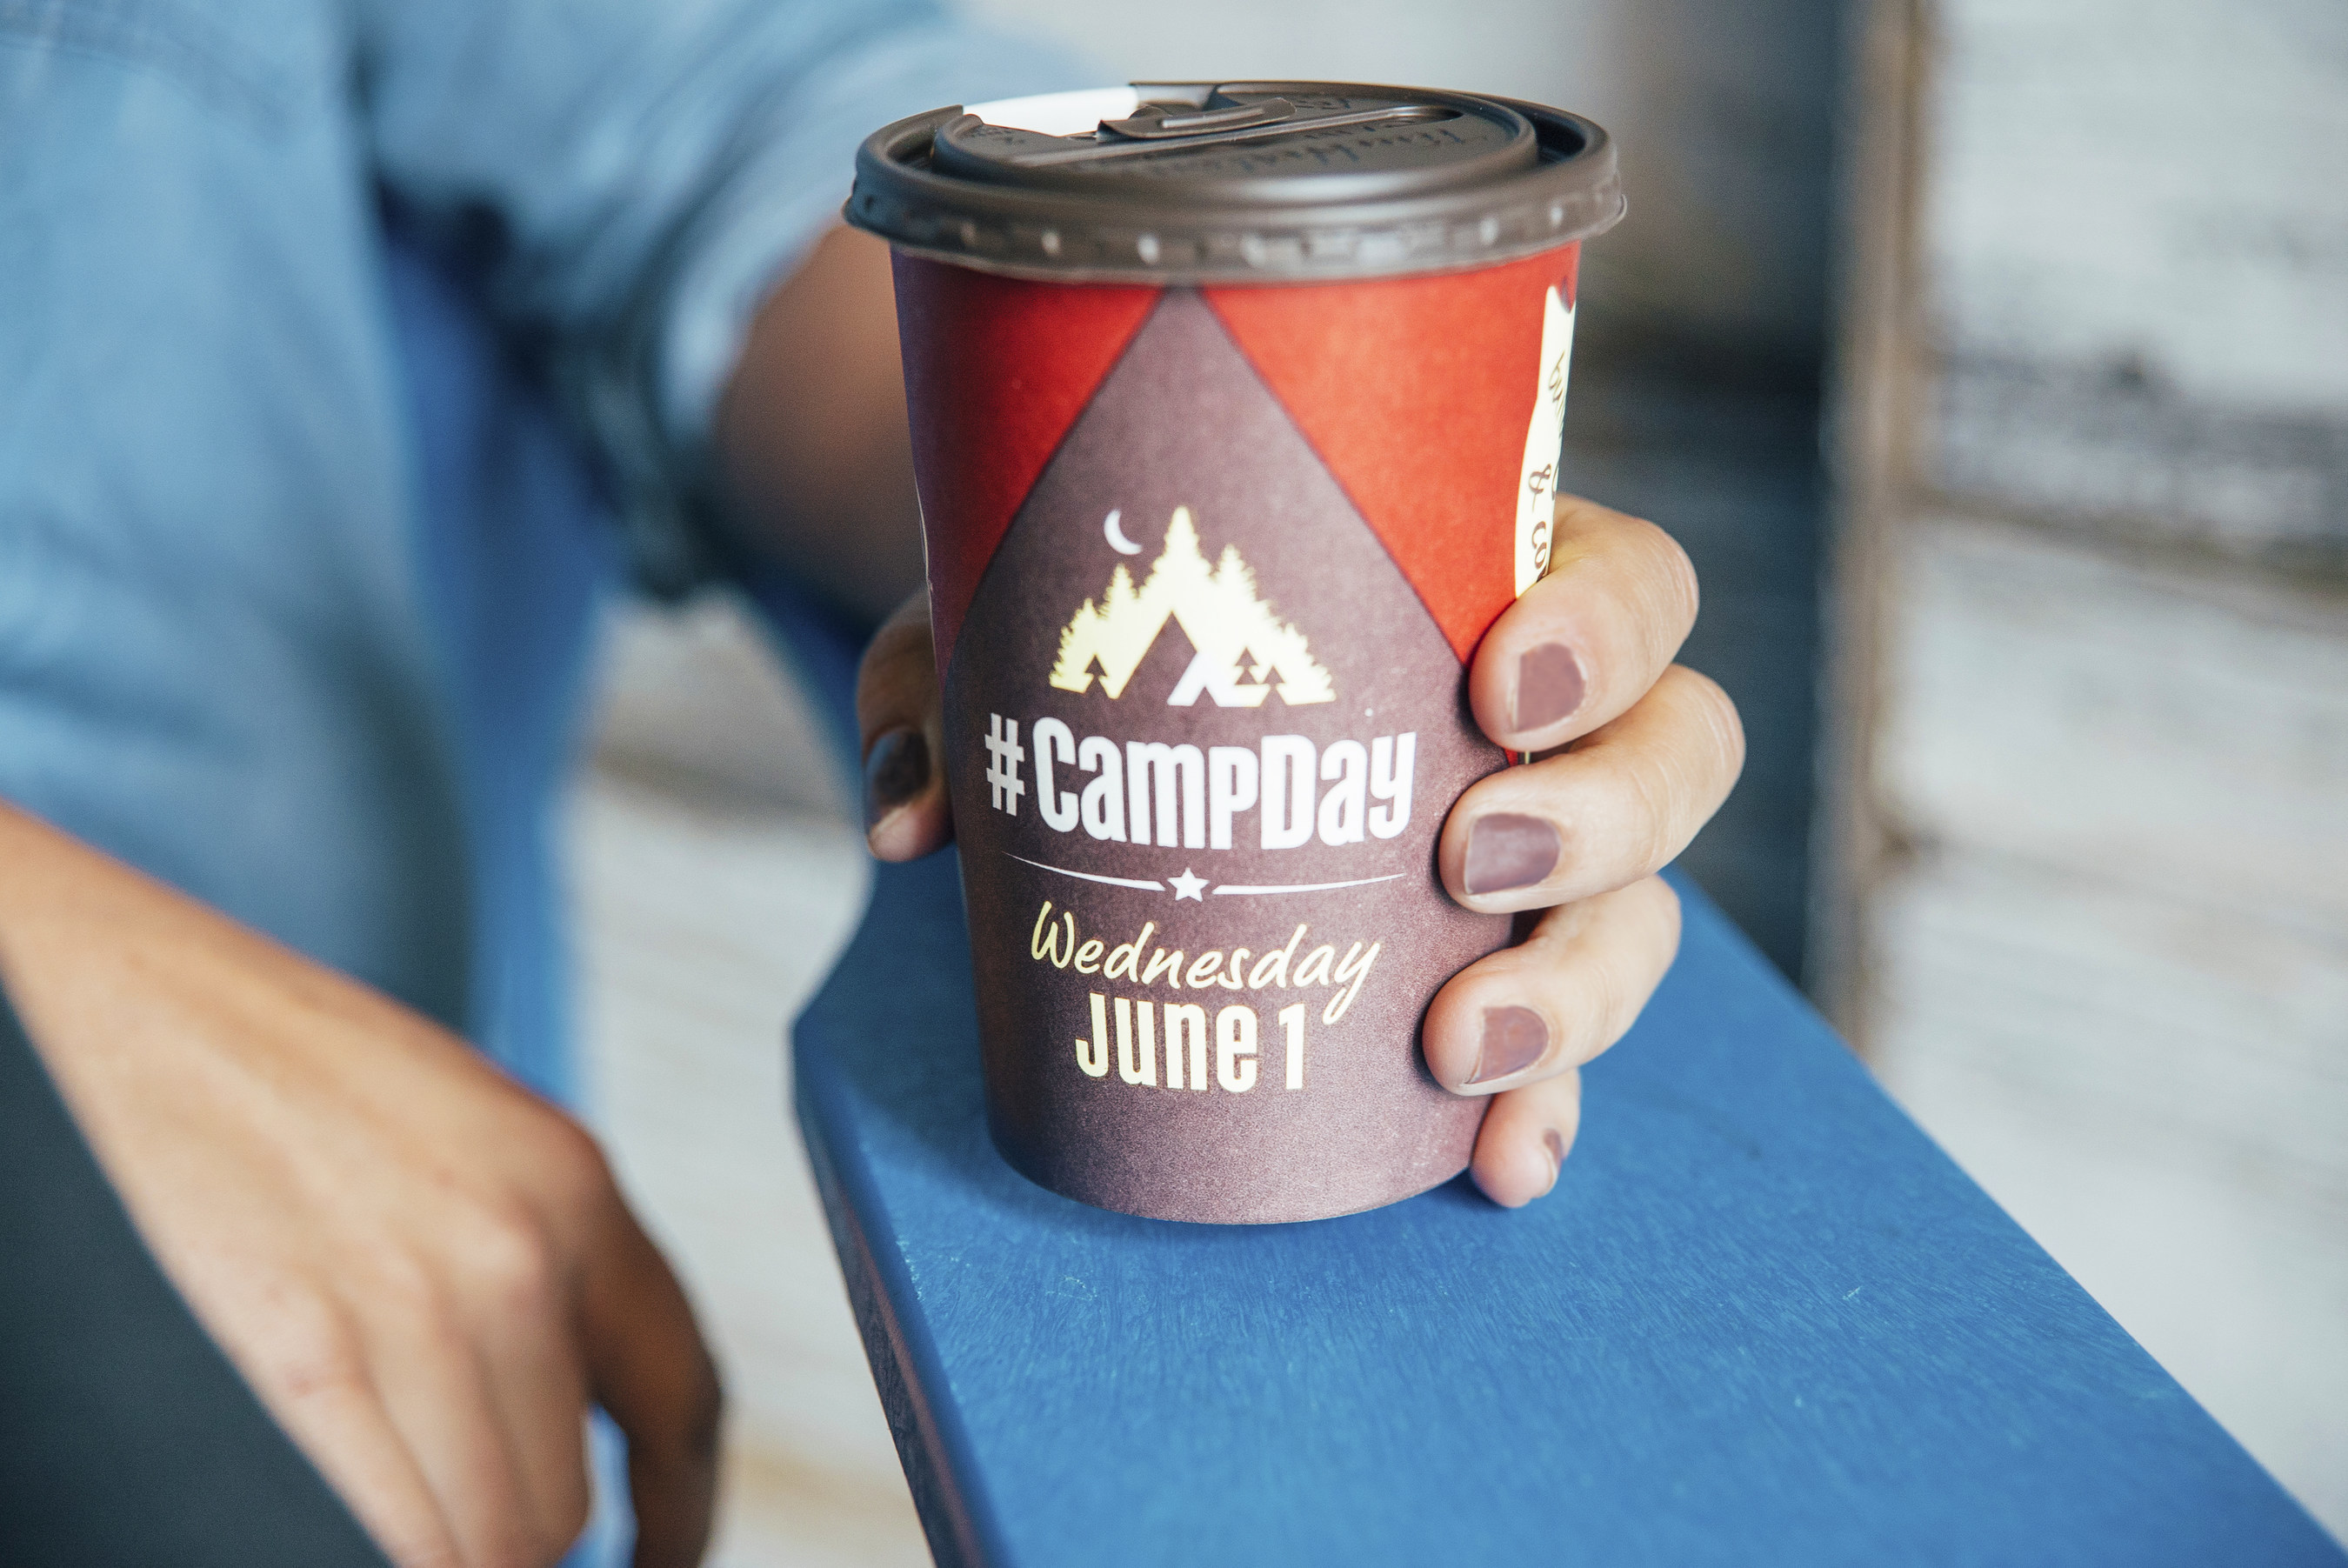 In celebration of the 25th anniversary, Tim Hortons launched a new cup design that showcases the life-changing benefits of Camp Day. The cup features speech bubbles showing the impact of what buying a cup of coffee can have on kids' experience at camp including: helping kids believe in themselves, helping to create a brighter future, helping to build courage and confidence, and helping kids to be their best.